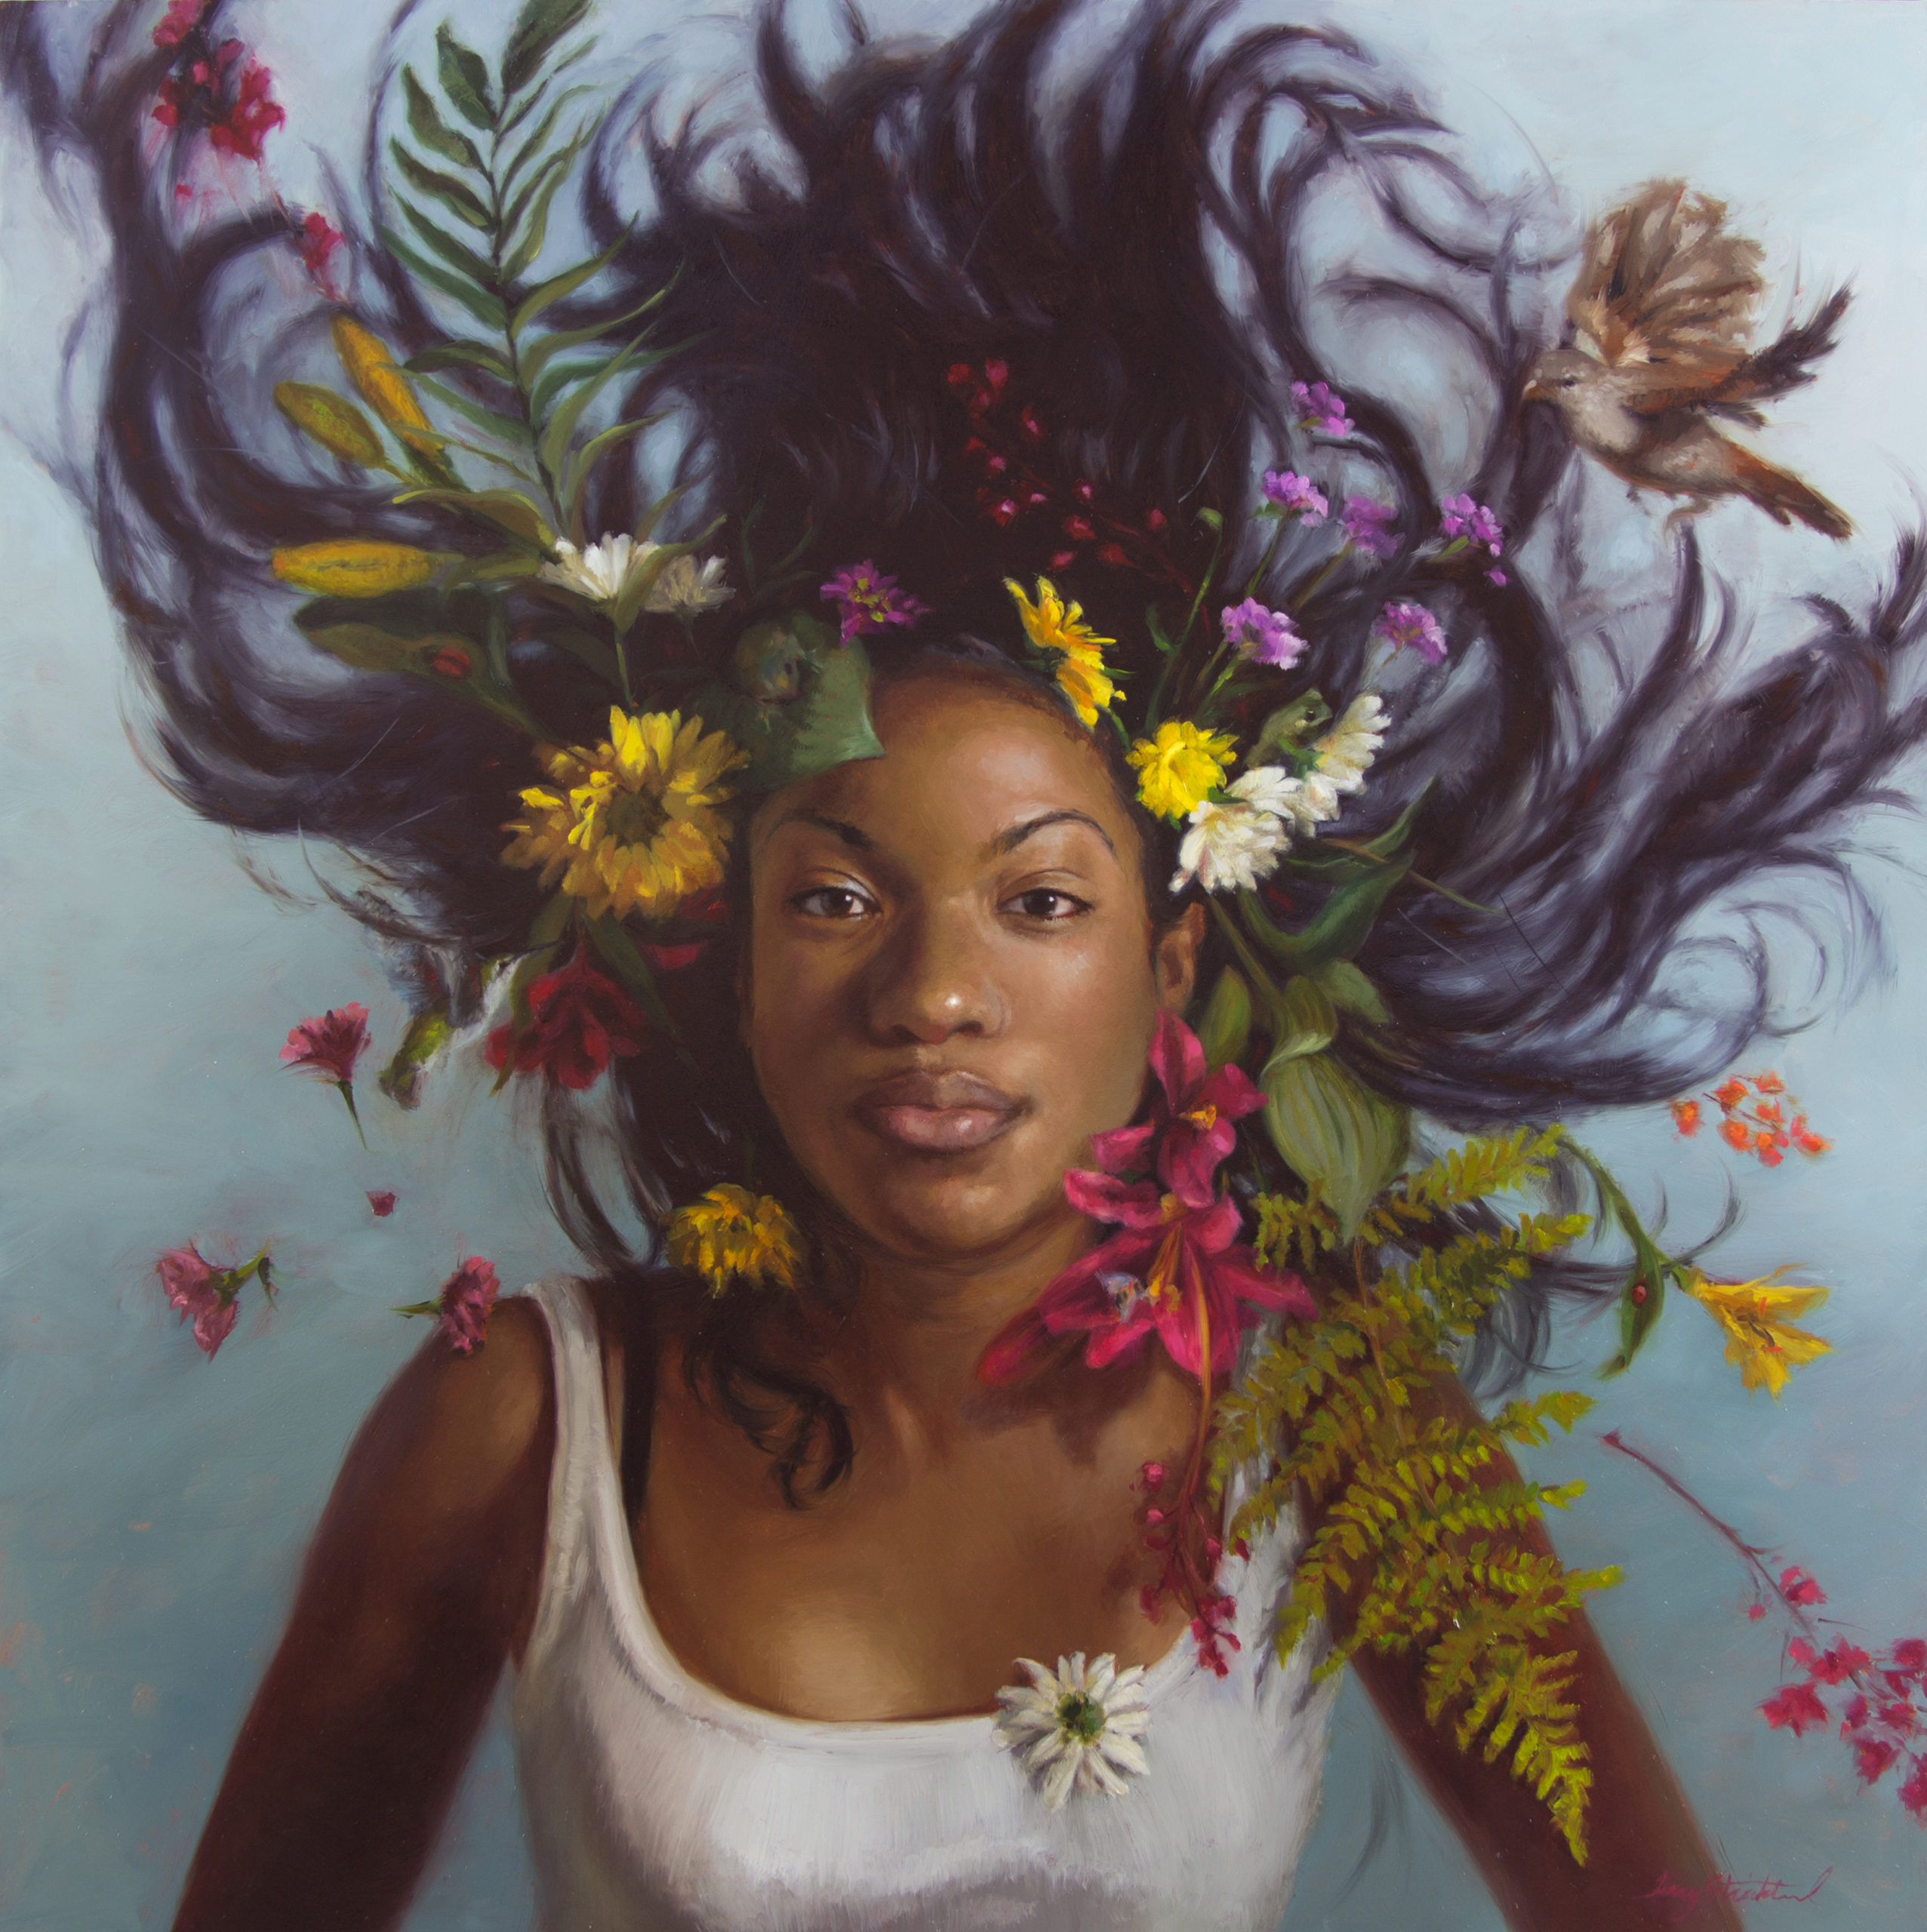 Contemporary realism portrait - Terry Strickland, "Medusa," 2022, oil on panel, 16 x 16 in. "Primavera," 2013, oil on panel, 24 x 24 in.